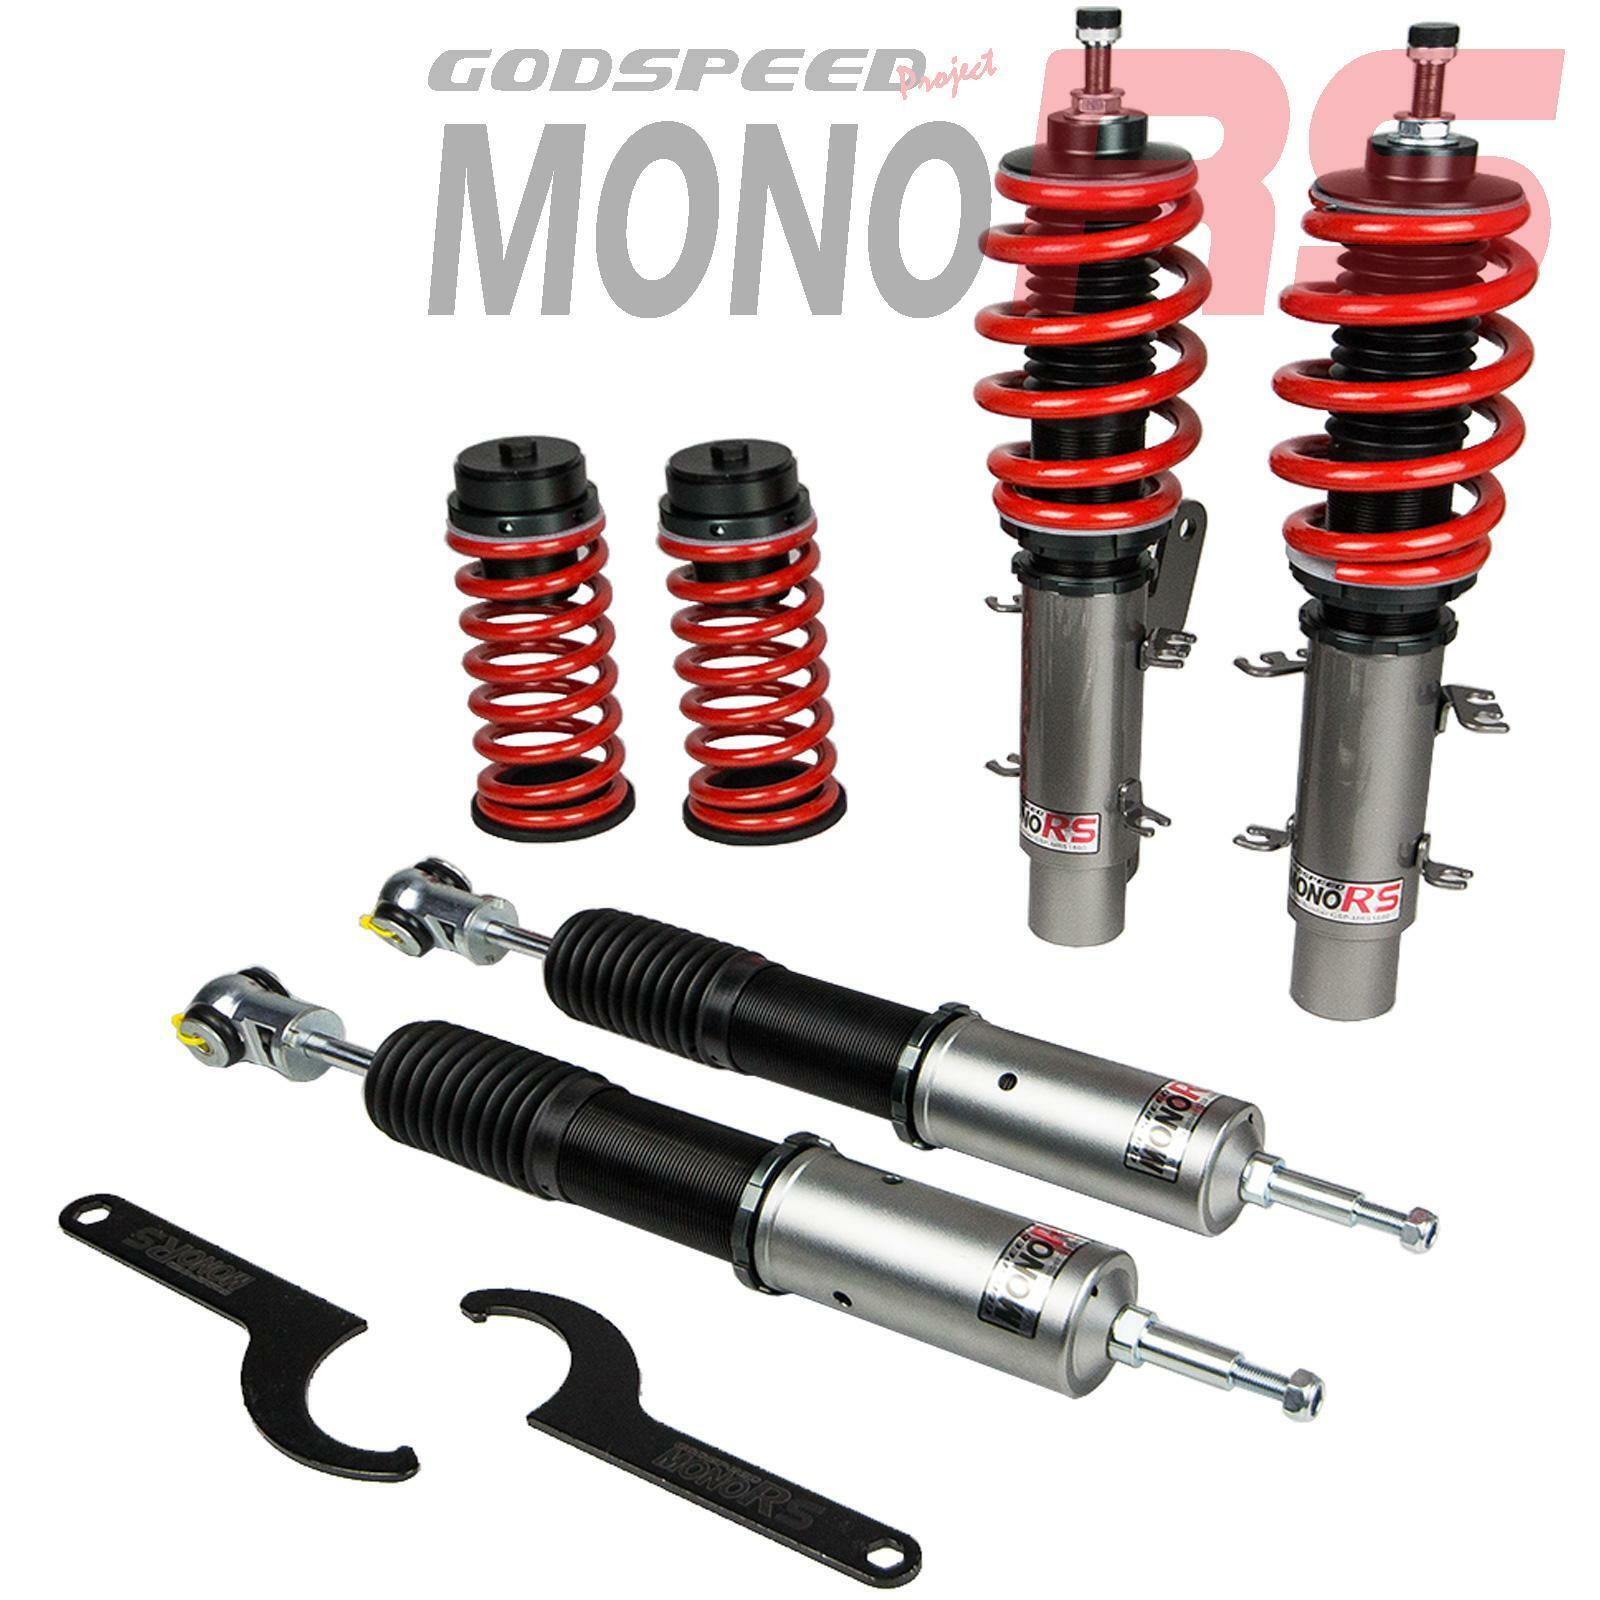 Godspeed made for Audi TT (8N) 2000-06 MonoRS Coilovers (49MM Front Axle Clam...